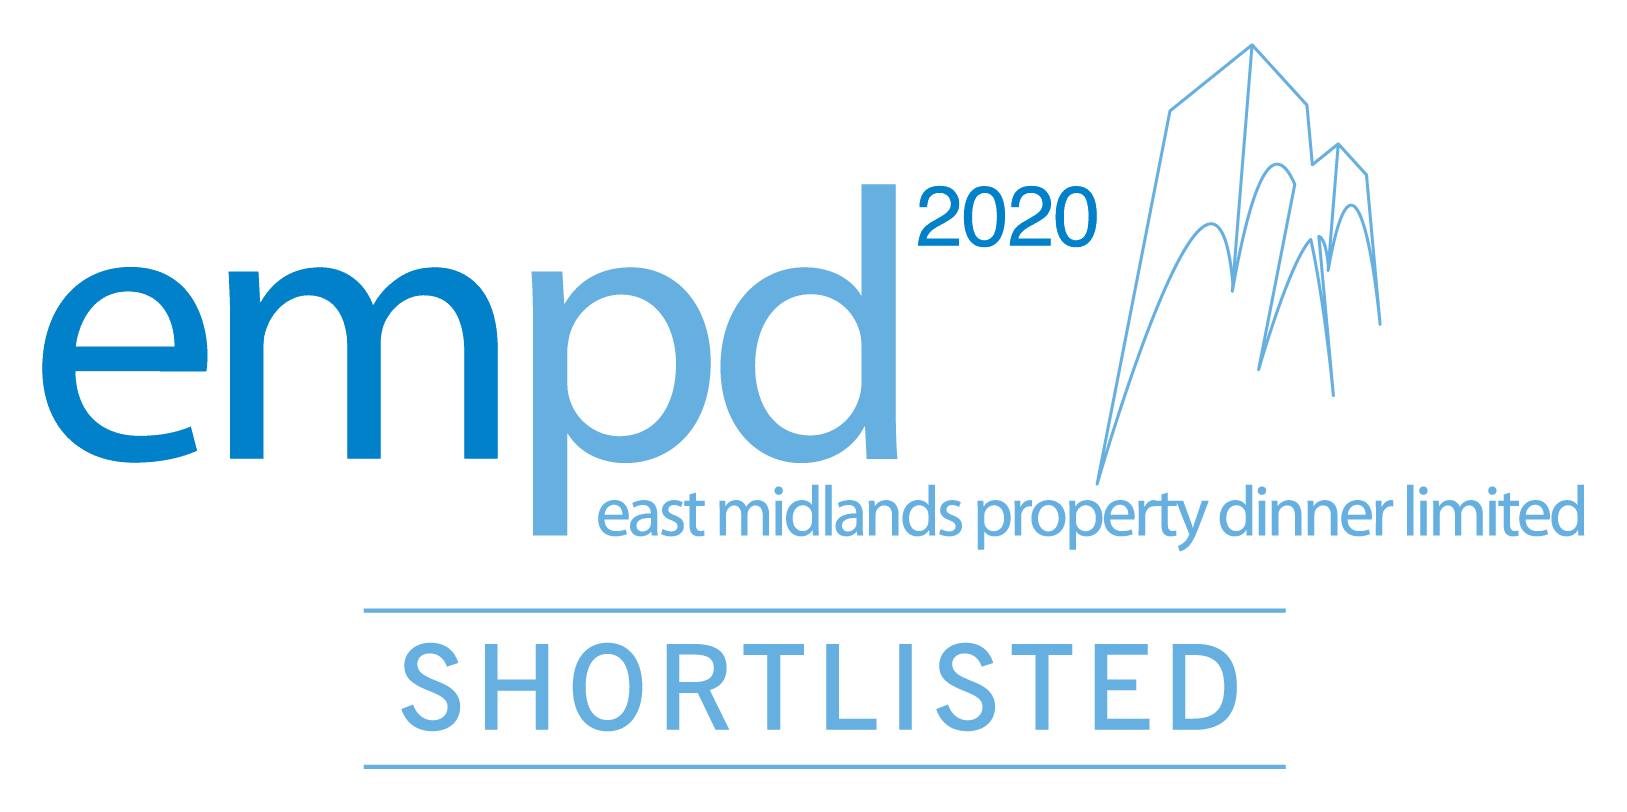 Henry Brothers Midlands scores success in the East Midlands Property Dinner Awards 2020